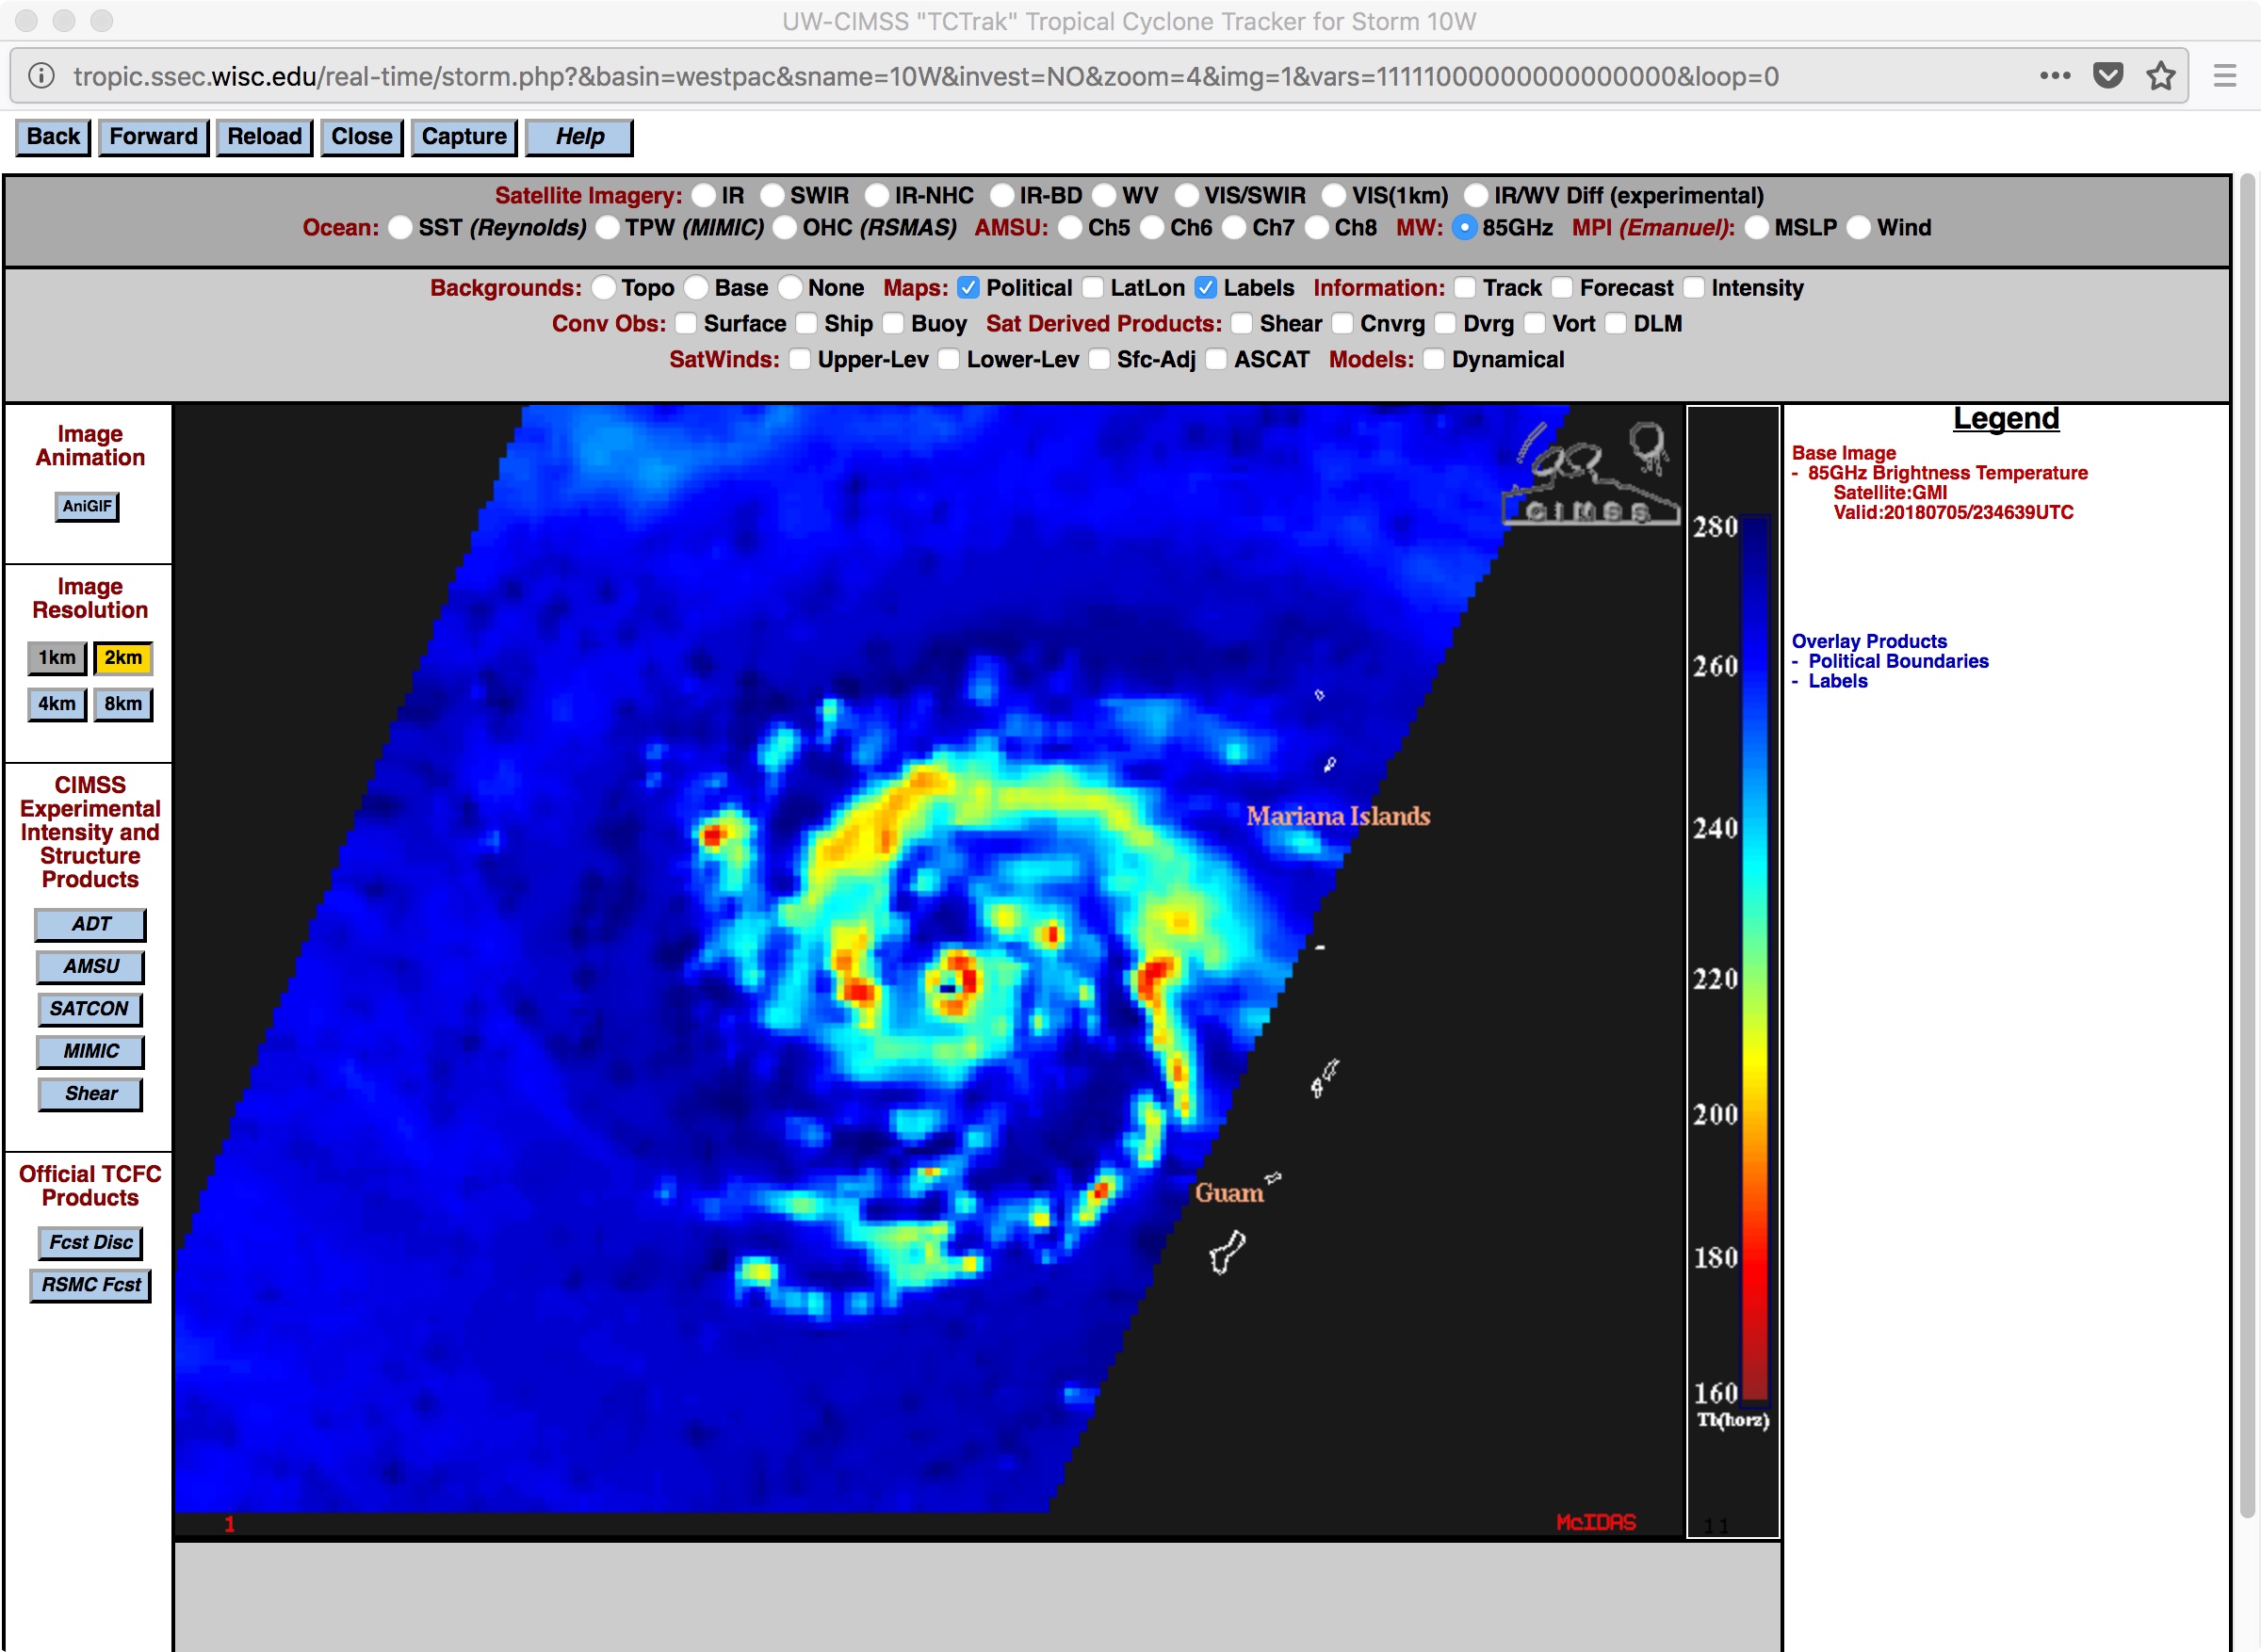 GPM GMI Microwave (85 GHz) image [click to enlarge]